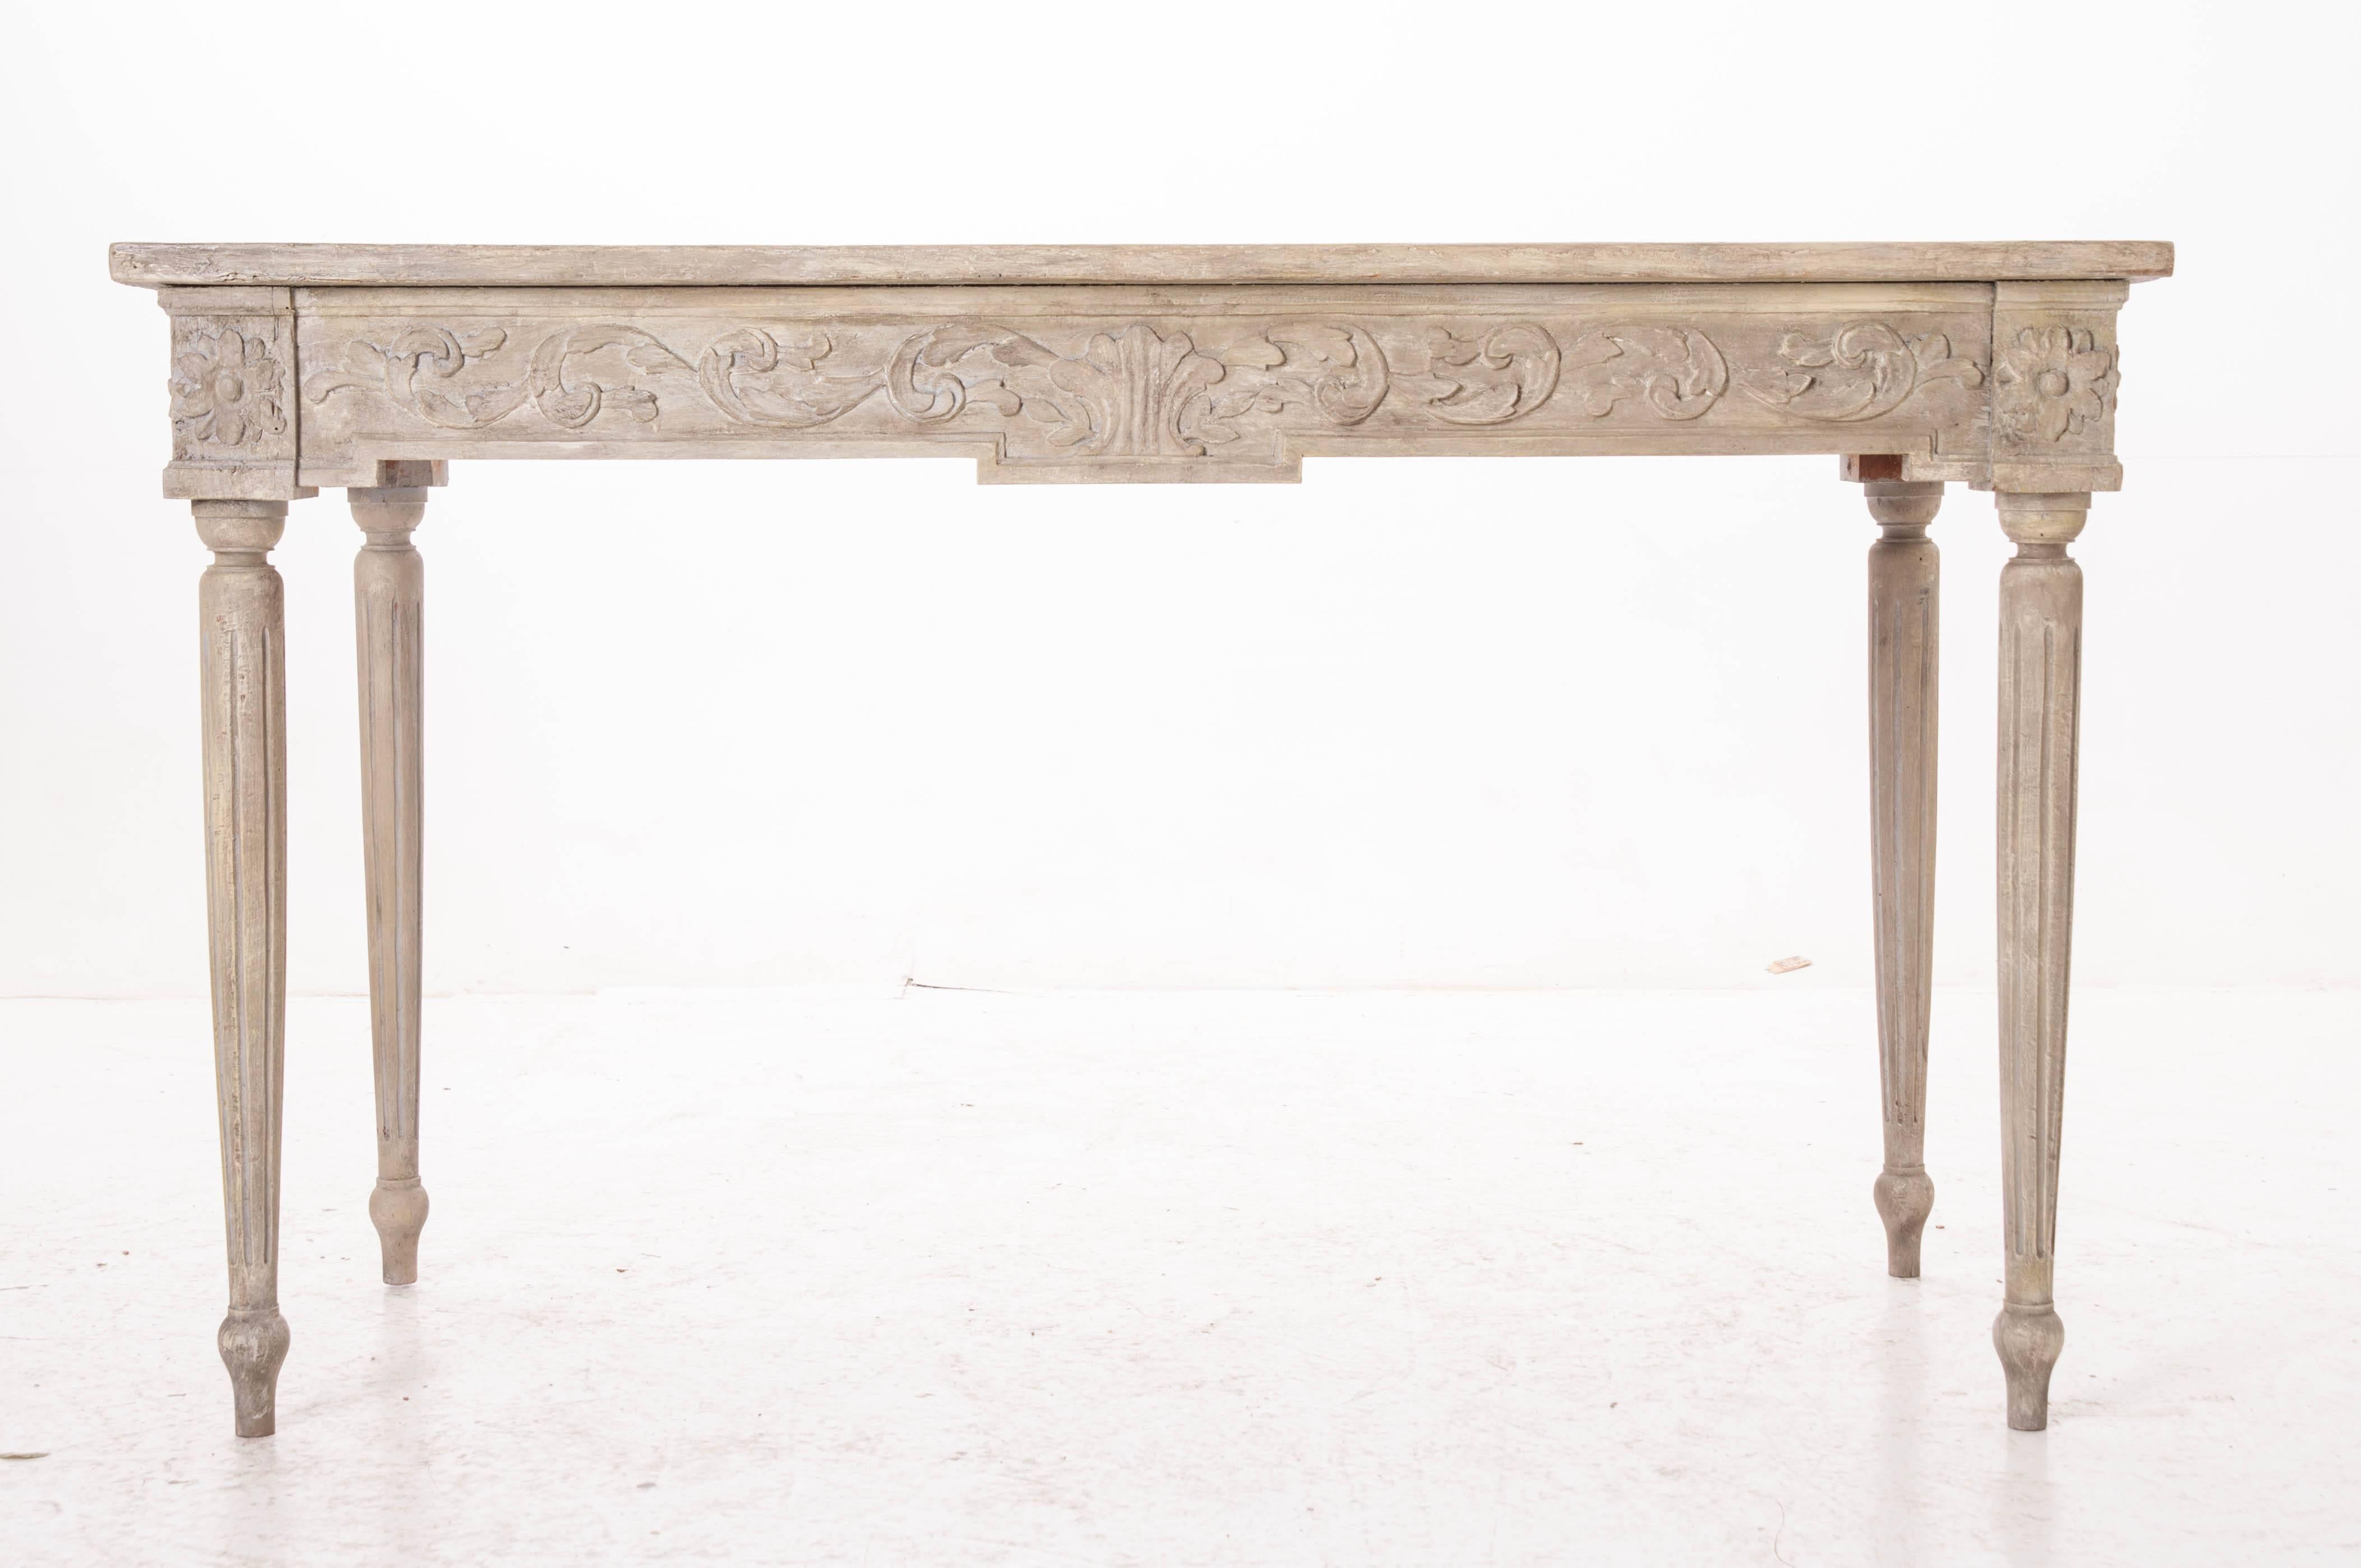 This Louis XVI style console is painted in an antique gray that bears exquisite age and patina. The apron boasts beautifully carved rosettes and scrolling acanthus leaves in deep relief. The console rests on delicate turned legs that have been